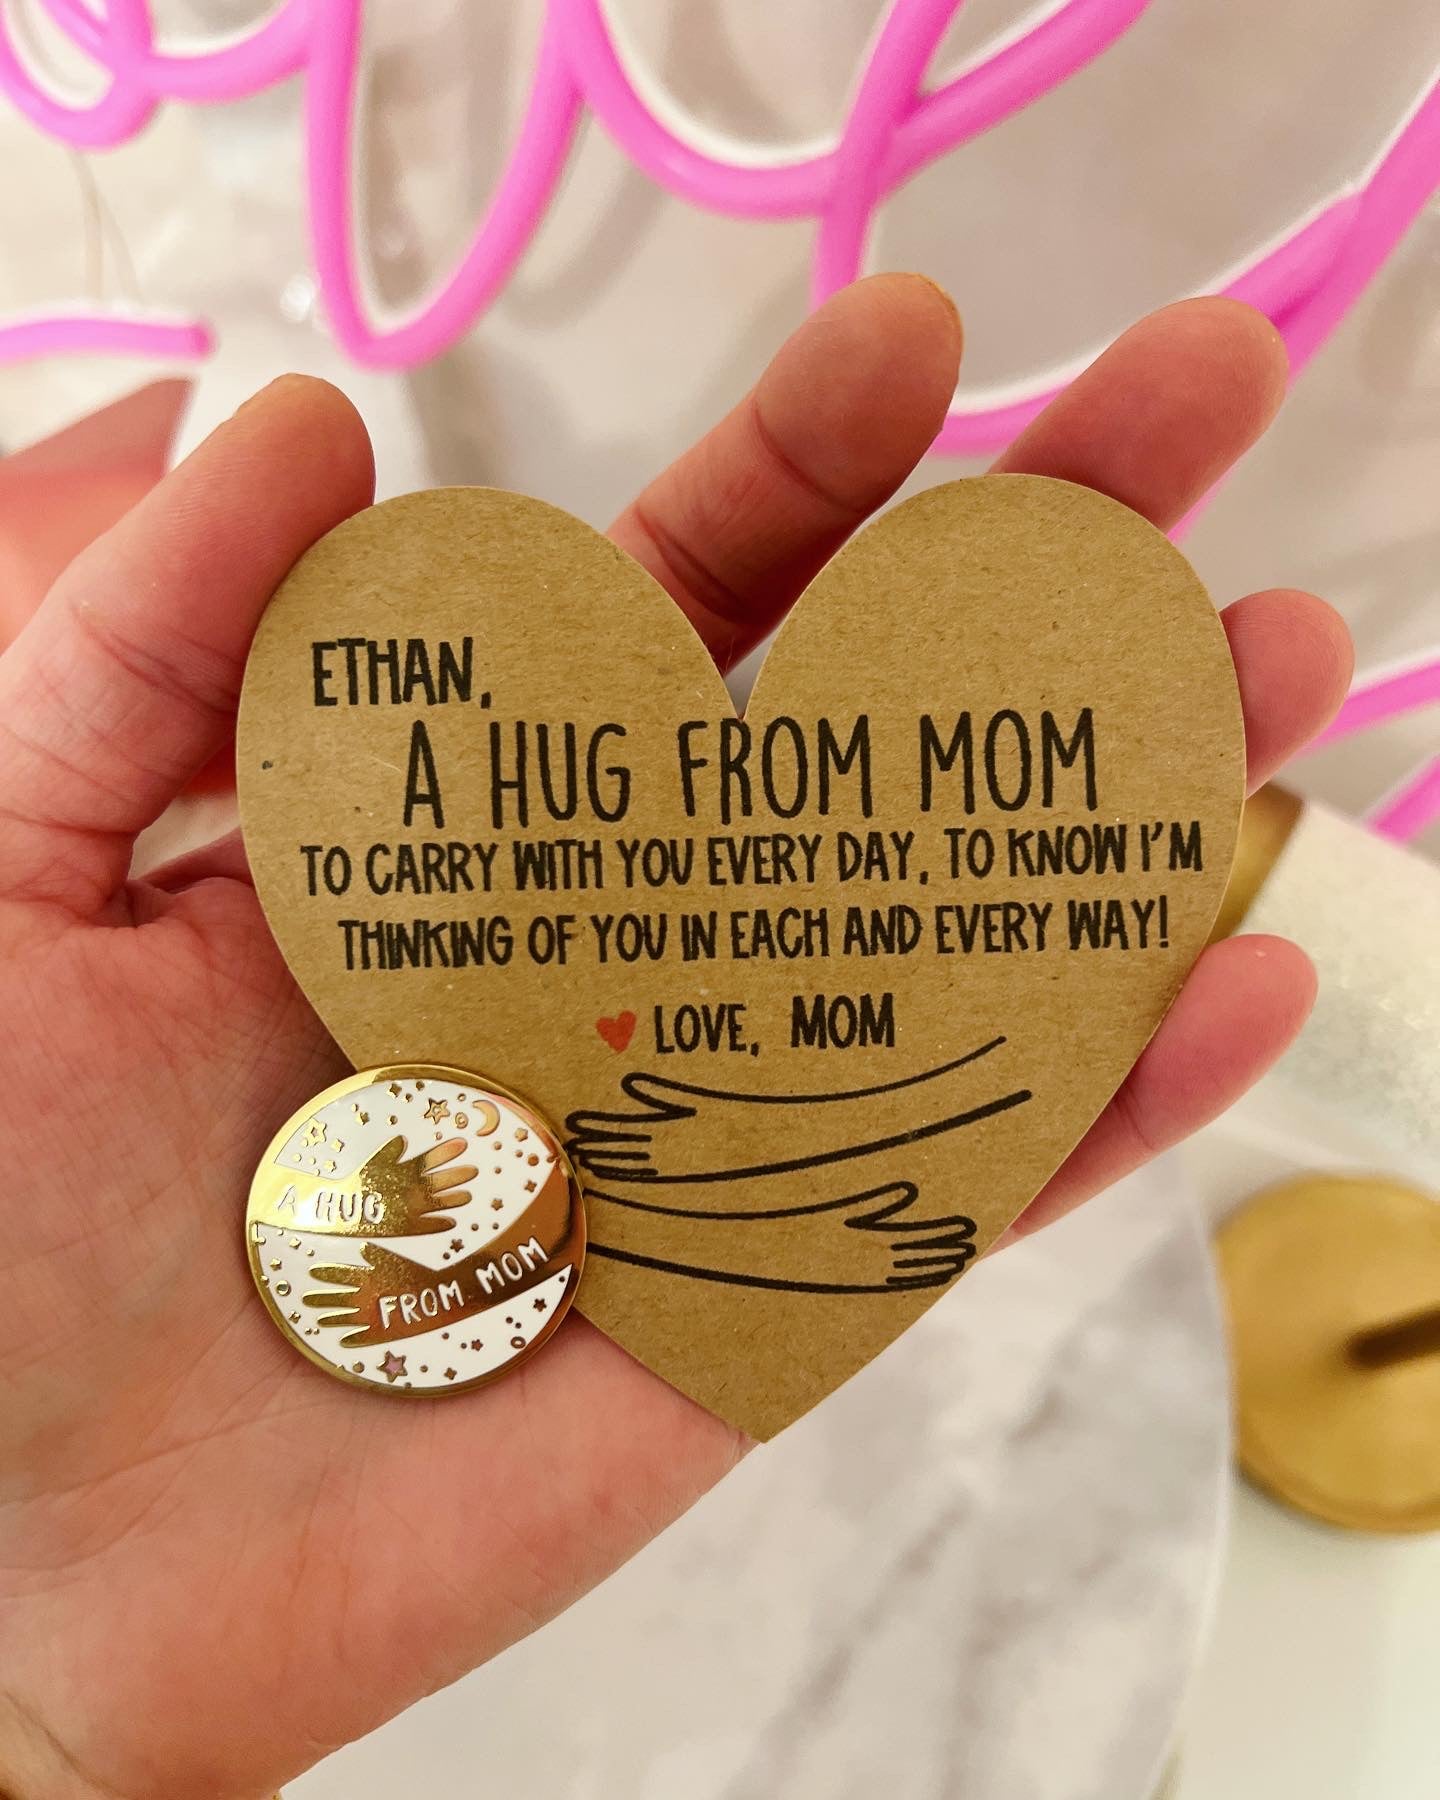 Hug from mom, First day of school backpack pin,  personalized card, box and ribbon included!